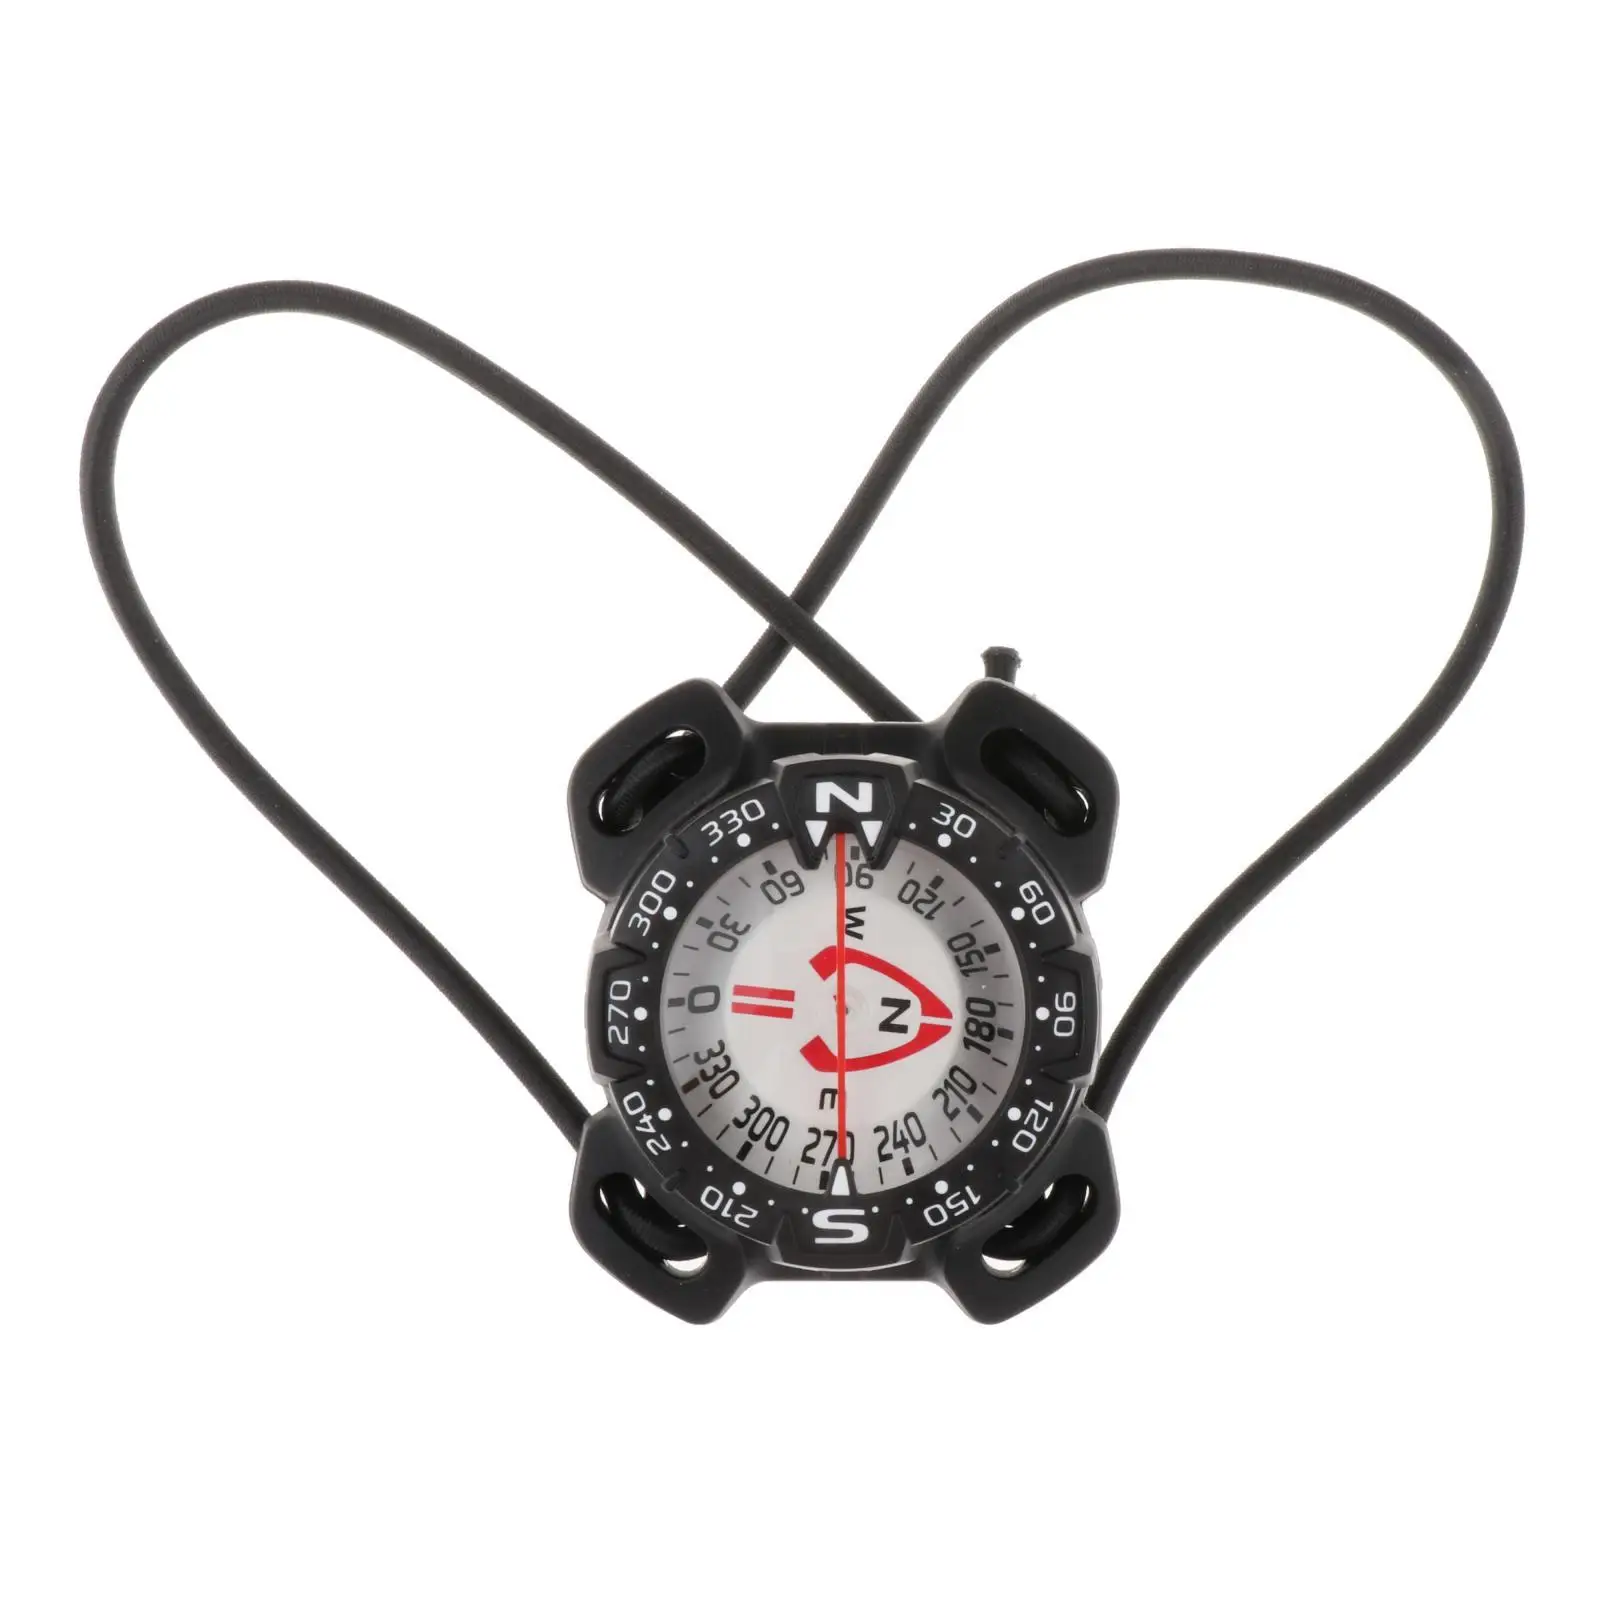 70M Underwater Compass Professional Diving Compass Dive Computers for Water Sports Backpacking Deep Diving Boating Kayaking